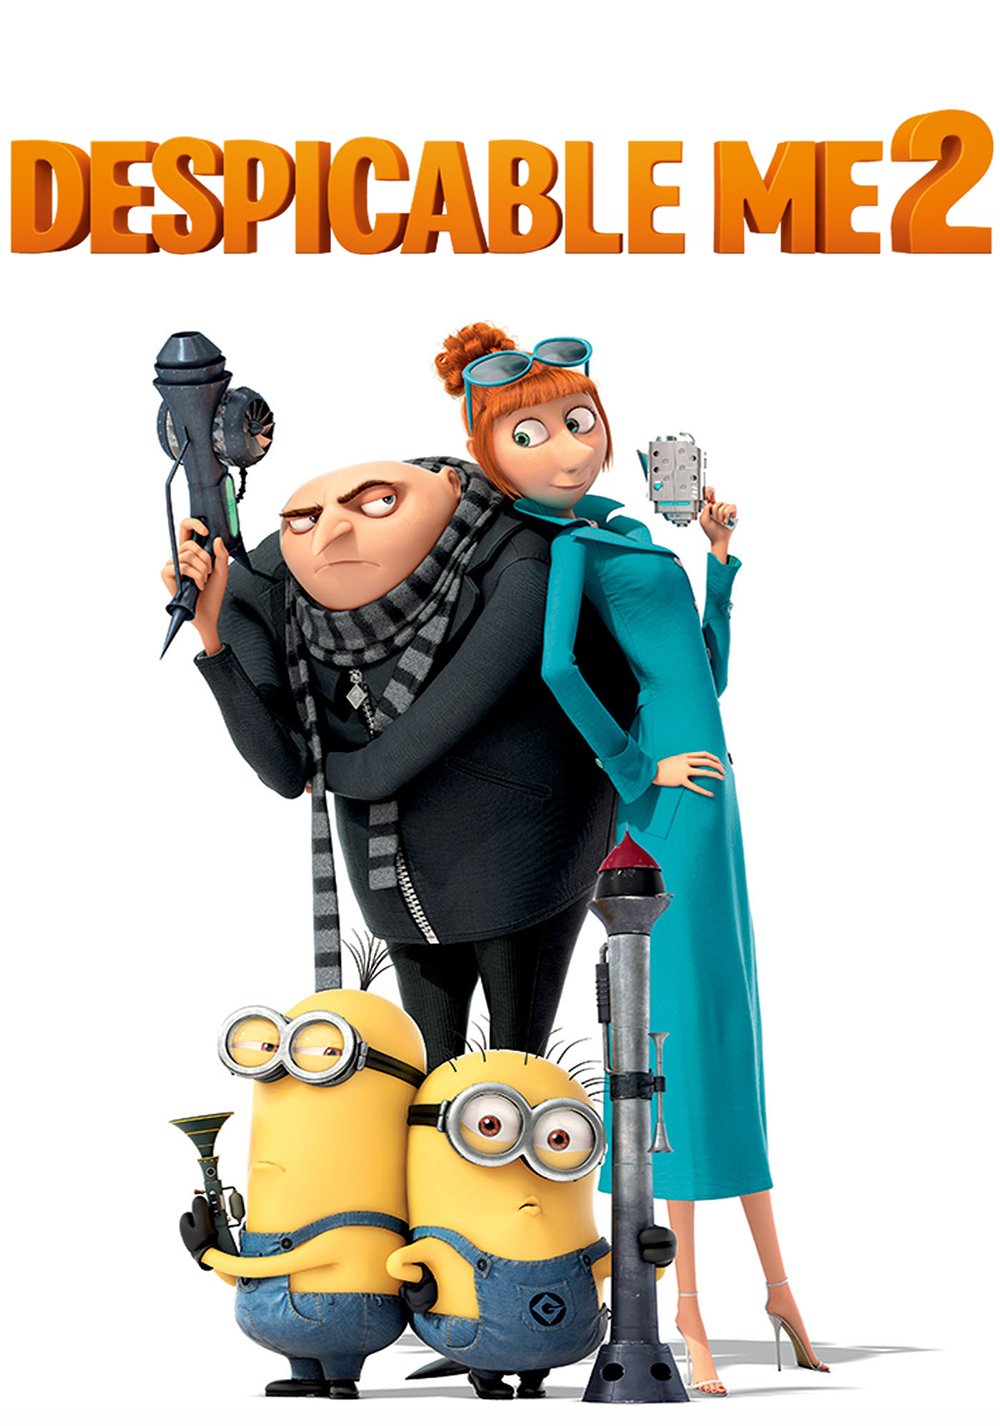 Despicable Me 2 Movie Poster - ID: 87200 - Image Abyss